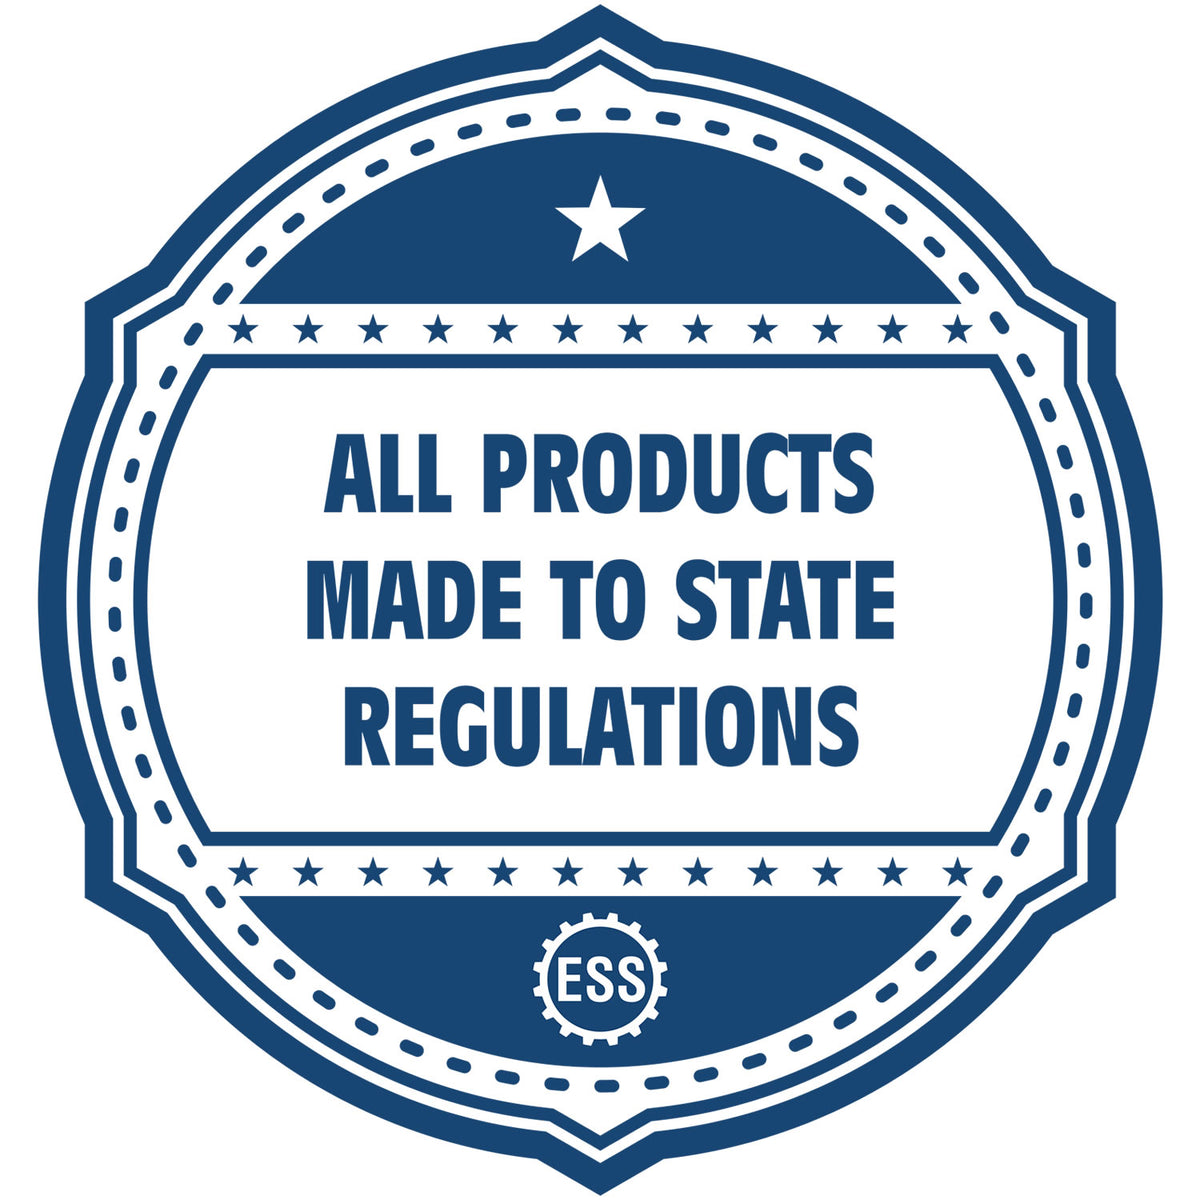 An icon or badge element for the MaxLight Premium Pre-Inked Missouri Rectangular Notarial Stamp showing that this product is made in compliance with state regulations.